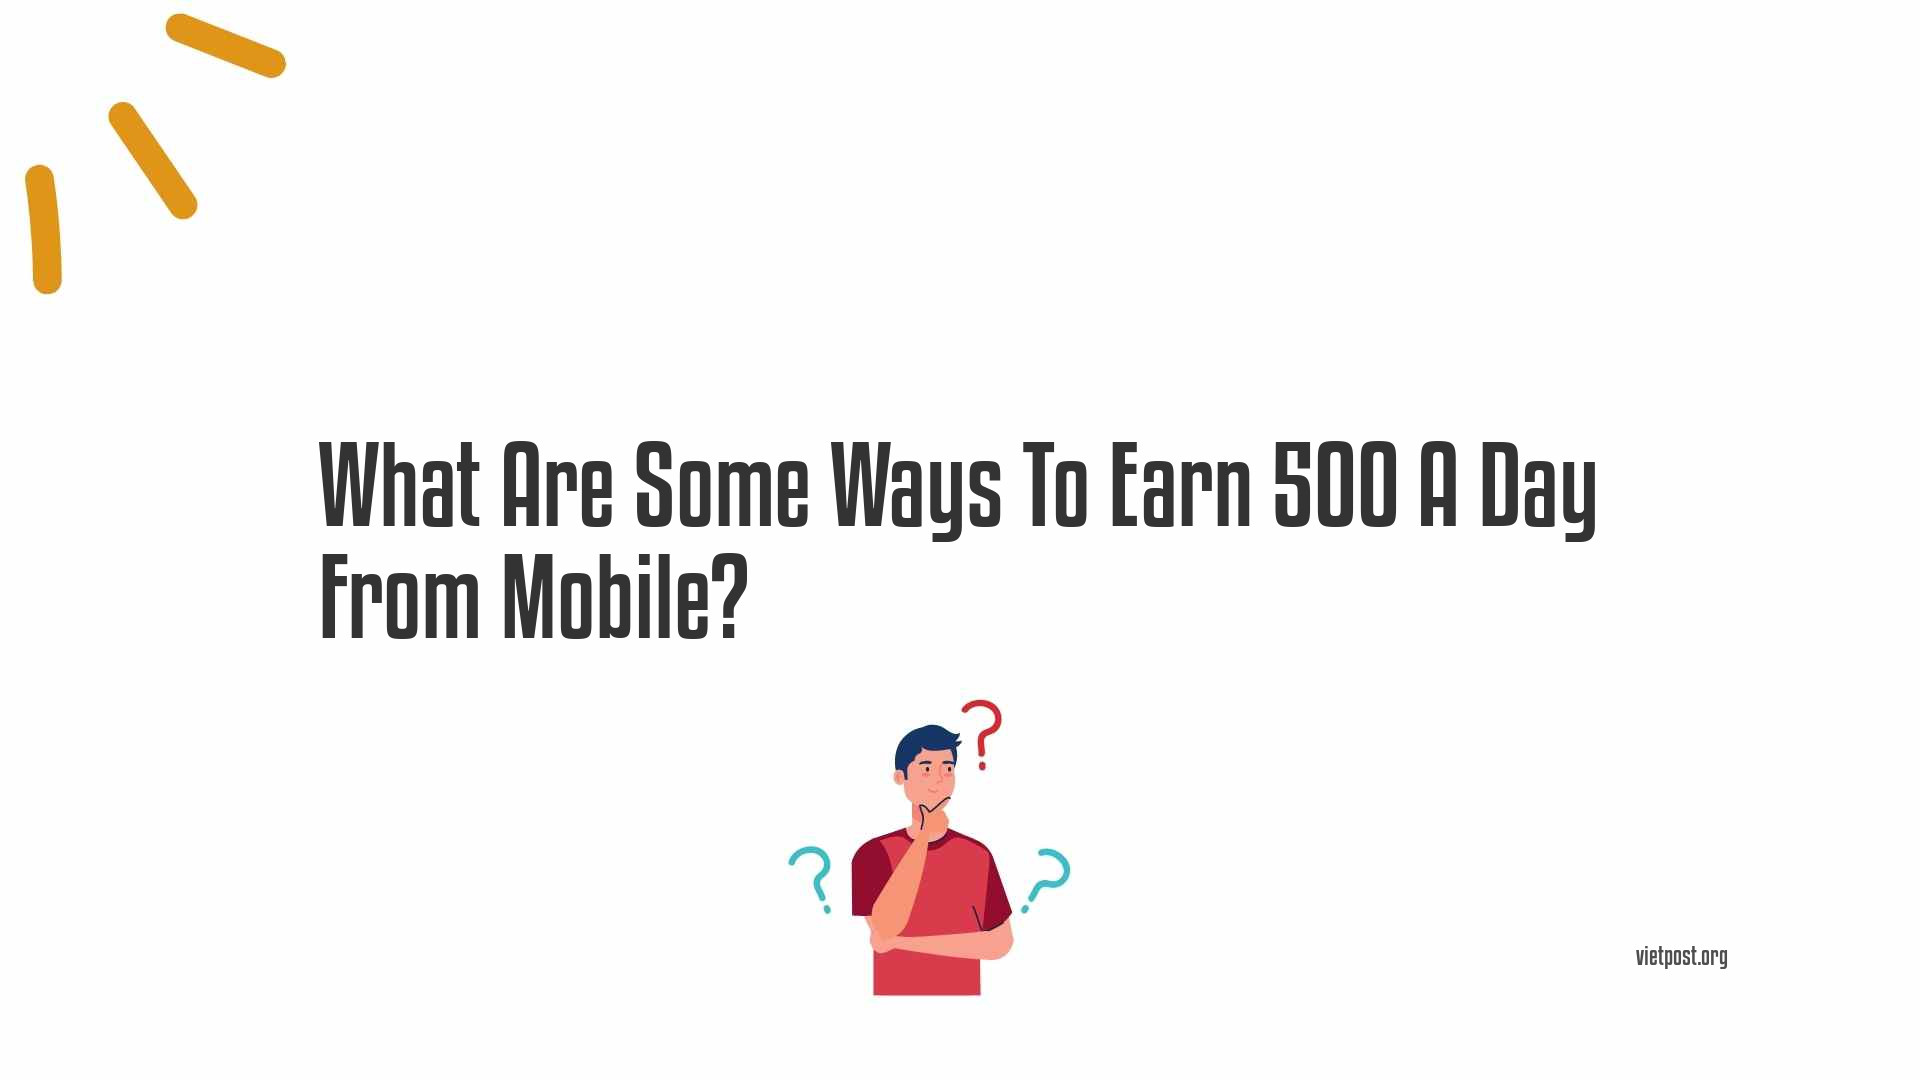 What Are Some Ways To Earn 500 A Day From Mobile?